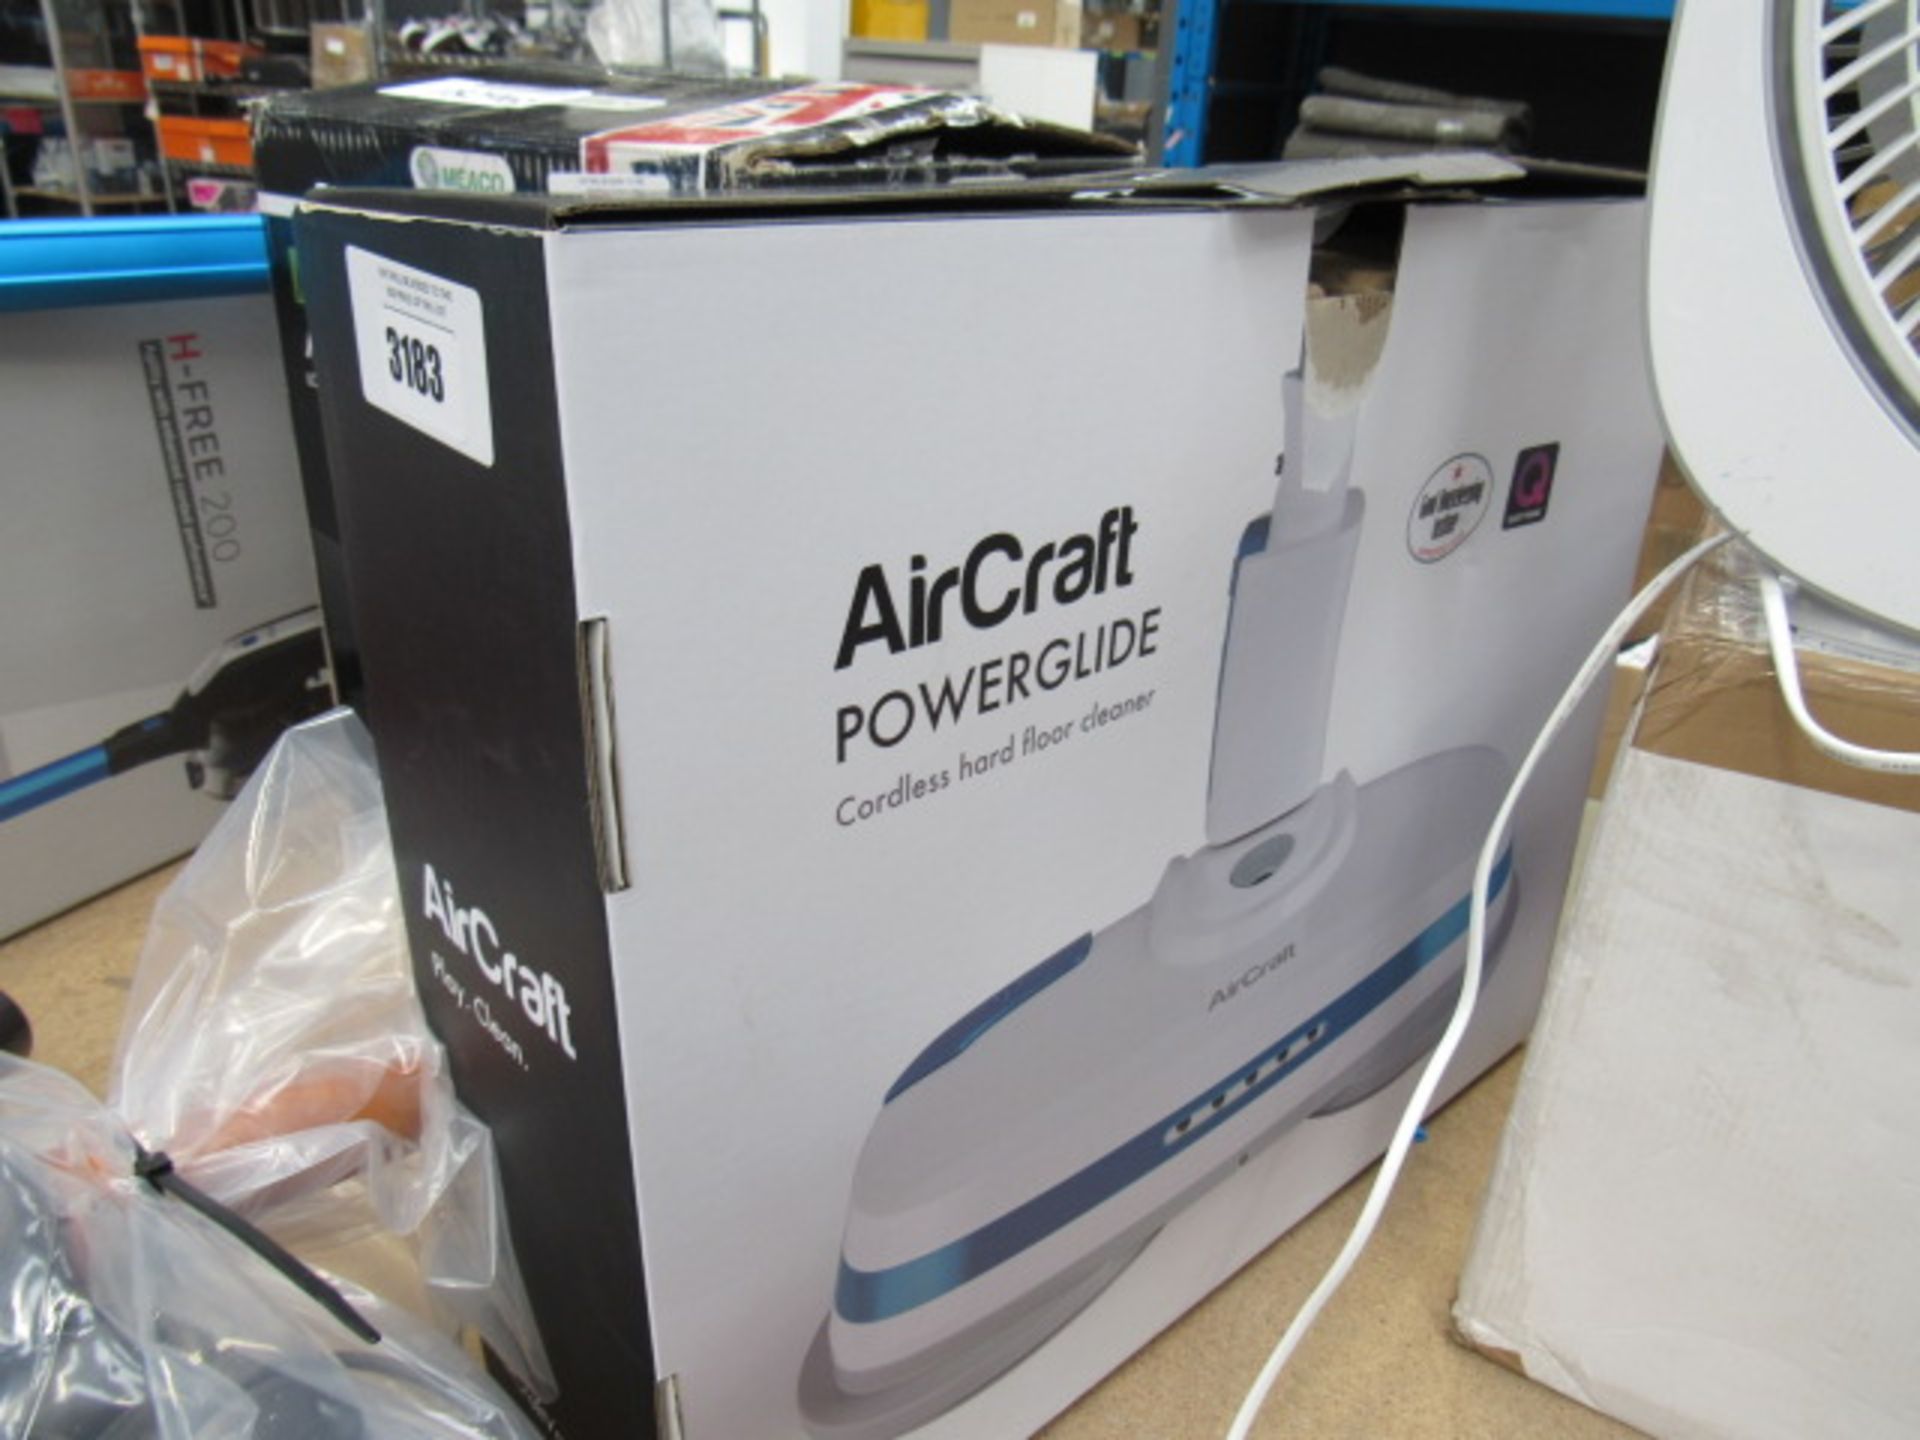 Aircraft power glide cordless hard floor cleaner with box